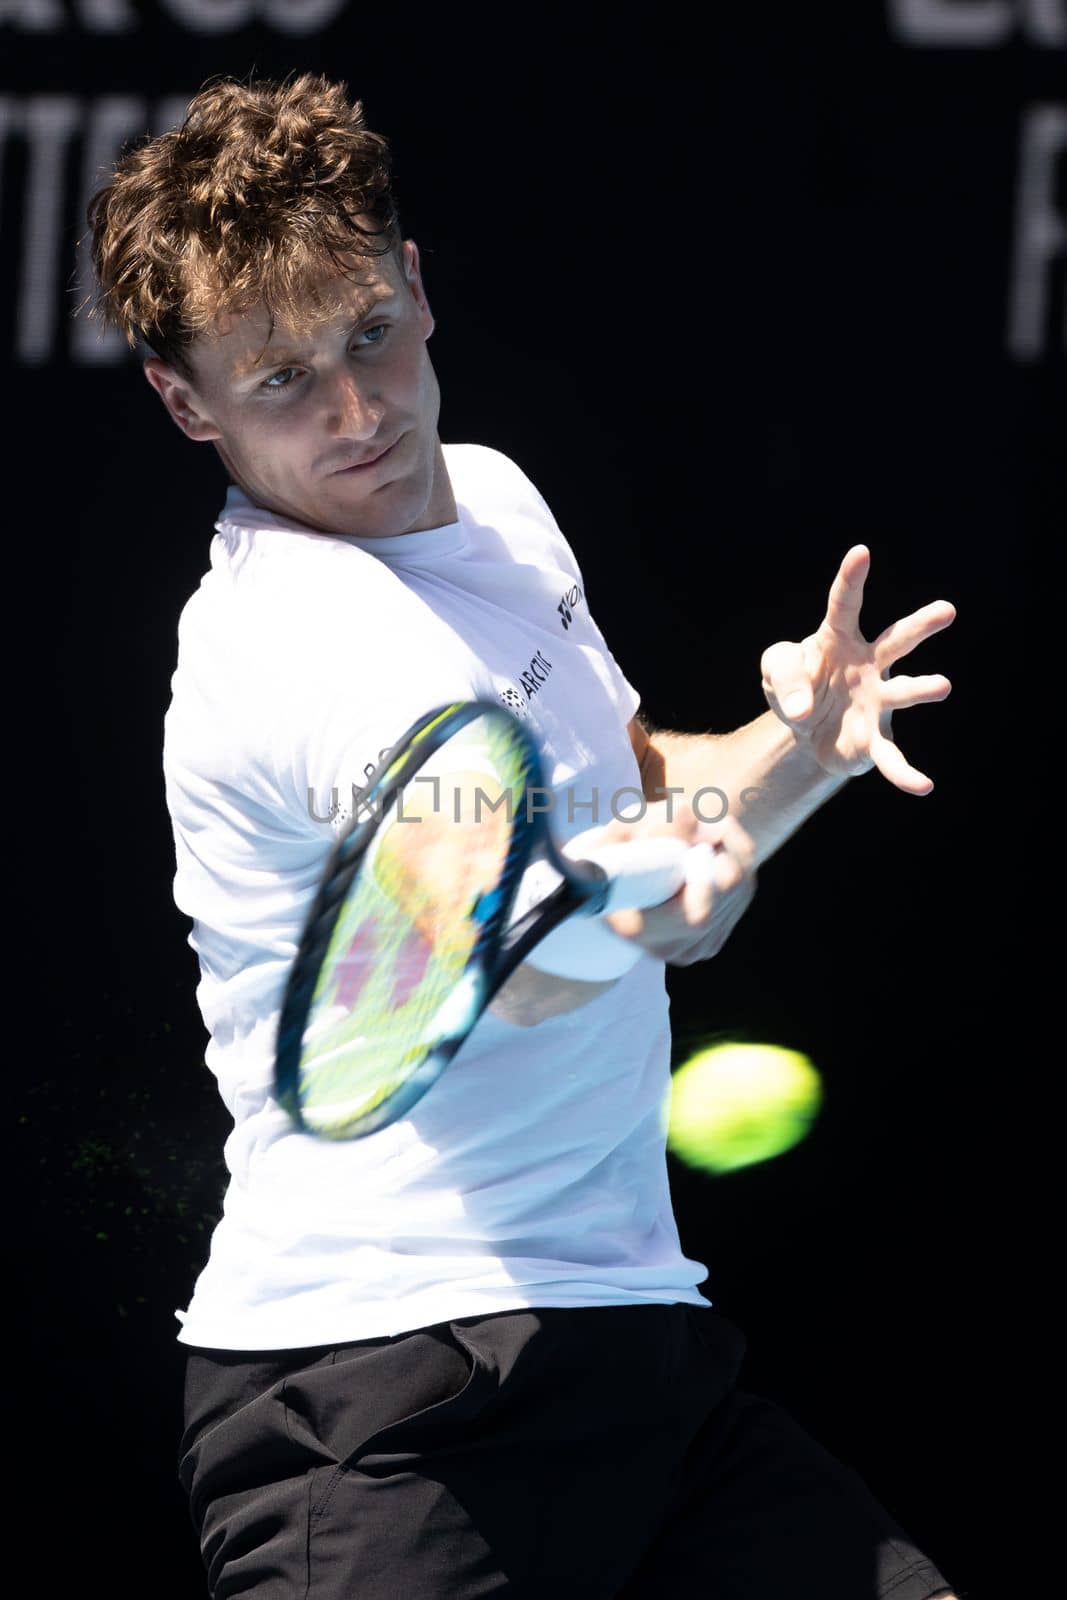 MELBOURNE, AUSTRALIA - JANUARY 13: Casper Ruud of Norway practices ahead of the 2023 Australian Open at Melbourne Park on January 13, 2023 in Melbourne, Australia.